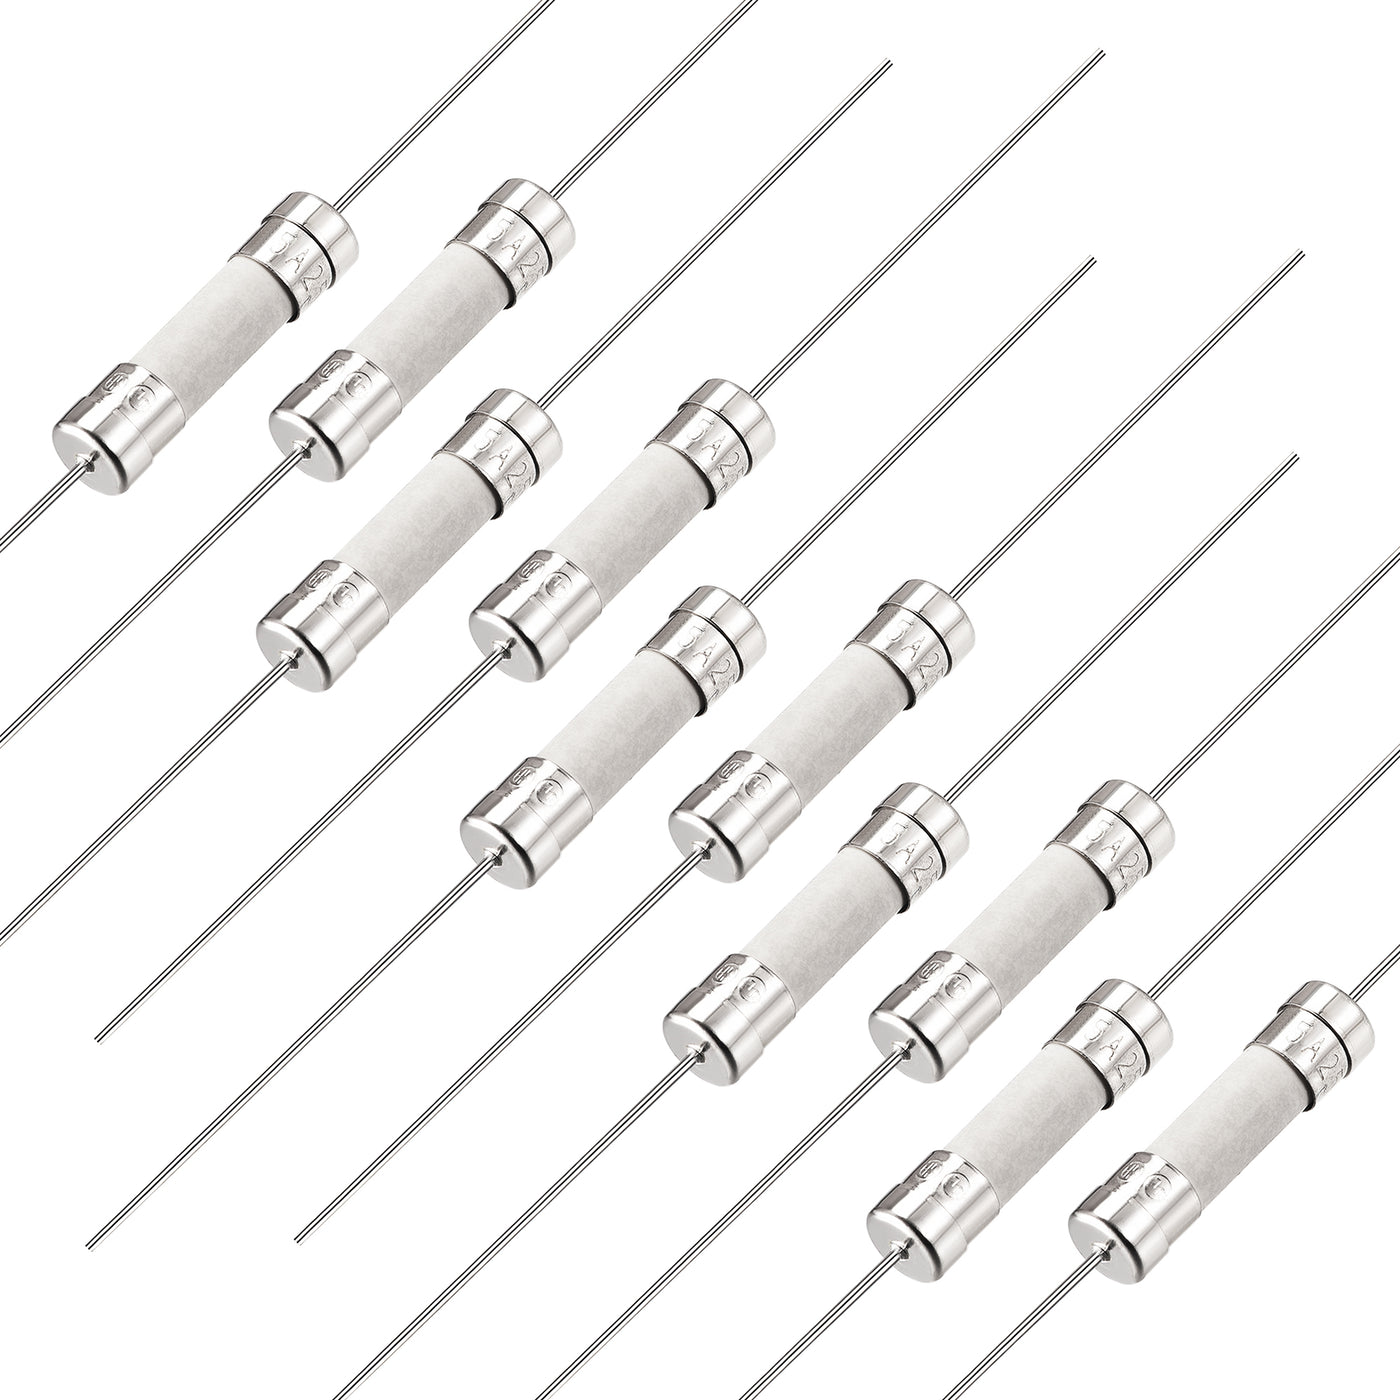 uxcell Uxcell Fast Blow Fuse Lead Wire Ceramic Fuses 5mm x 20mm 250V F5A 95mm Length 10Pcs